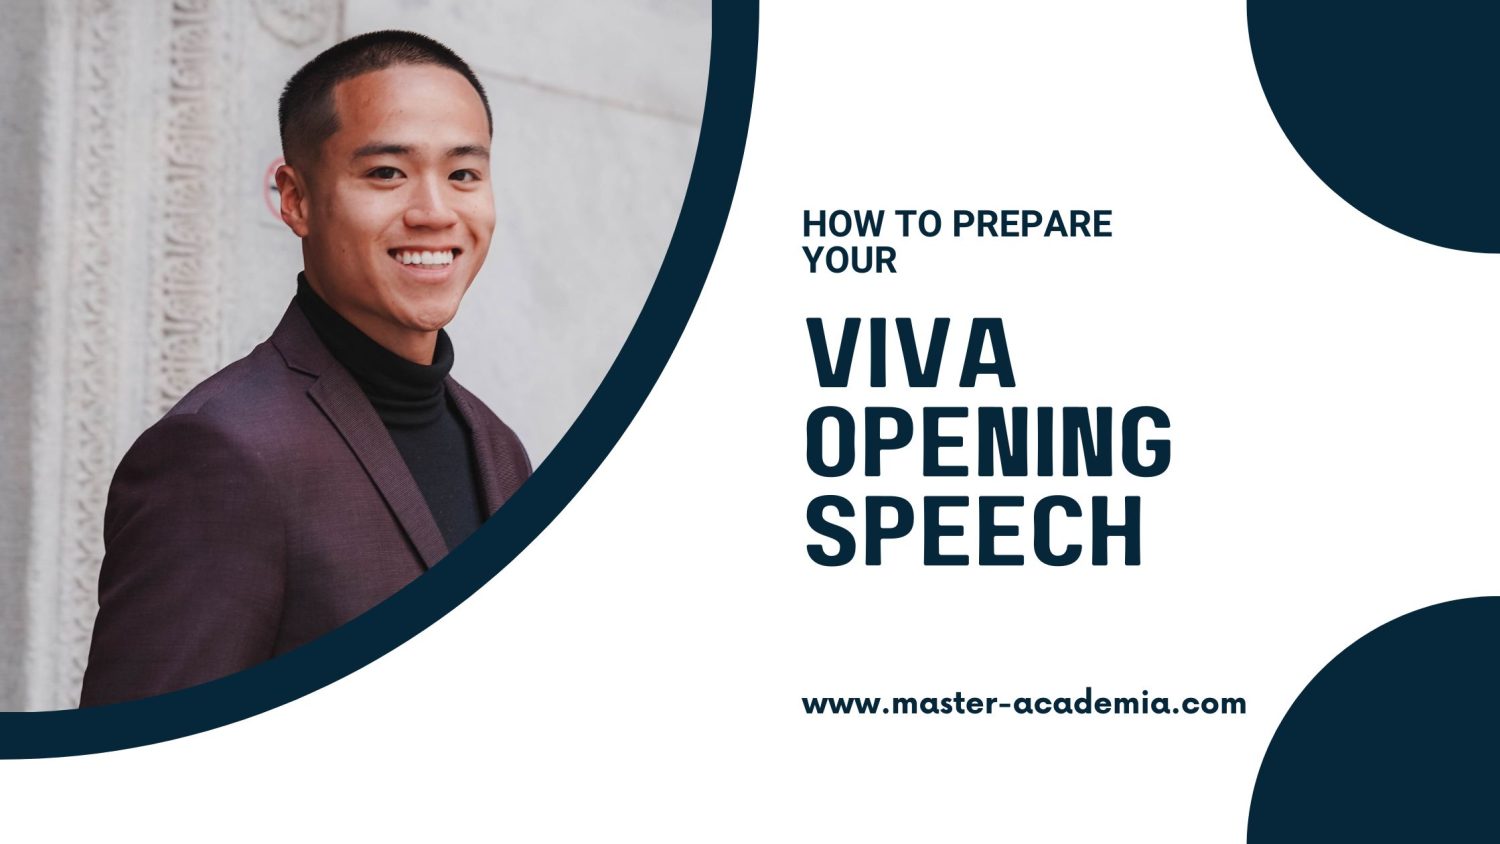 how to give viva presentation